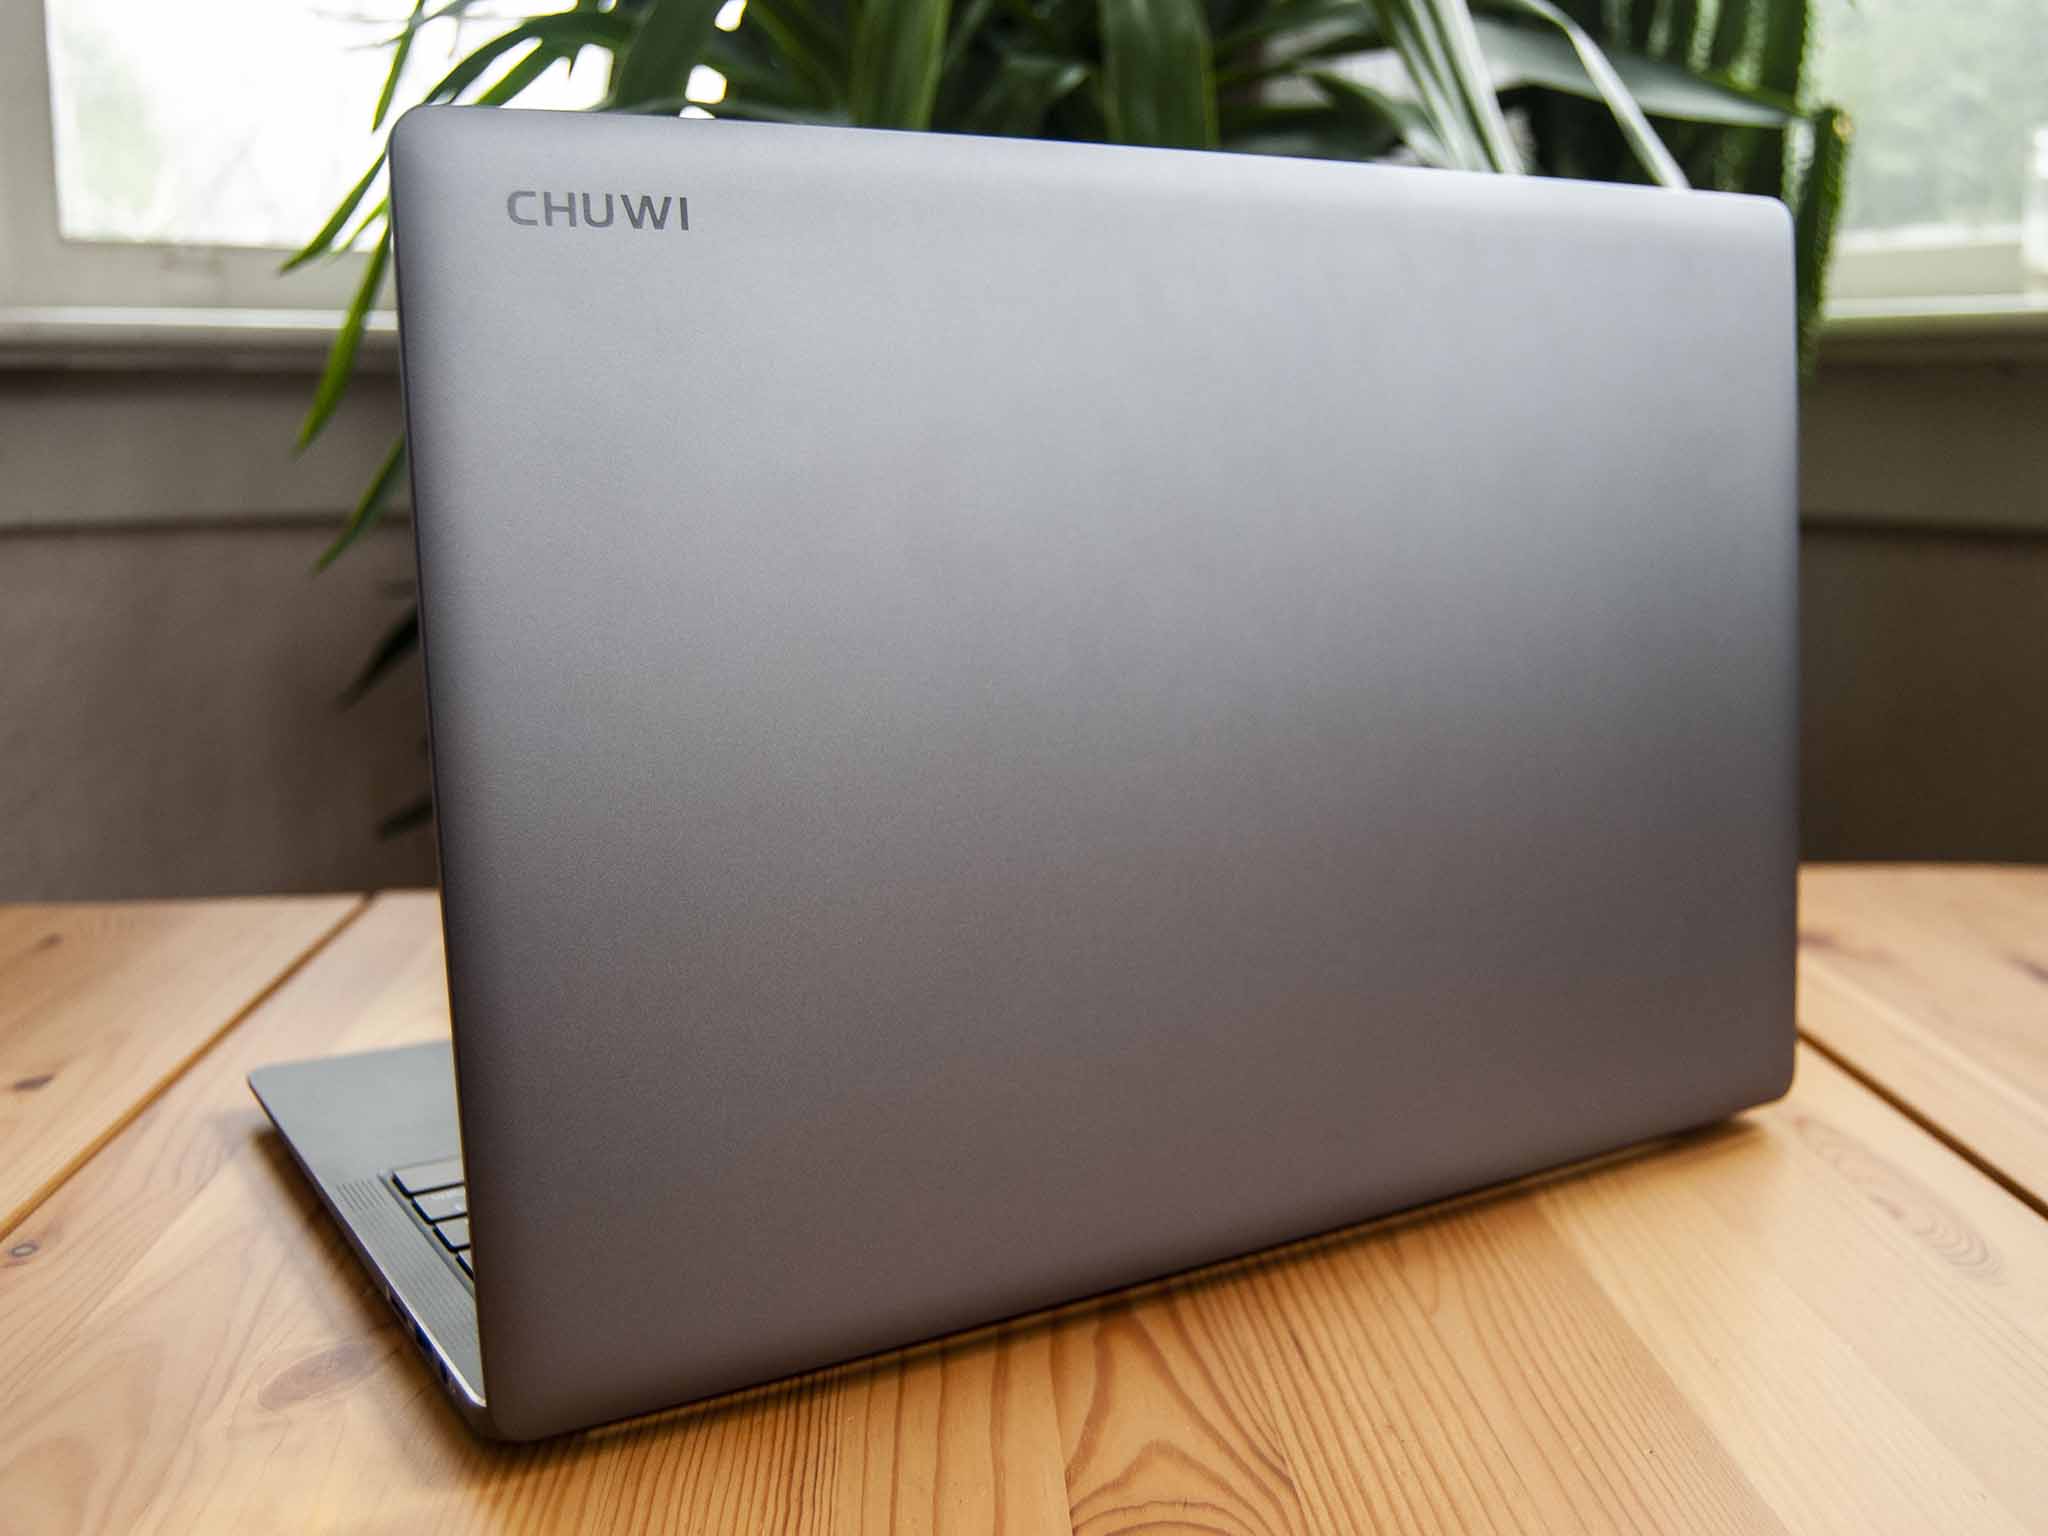 CHUWI AeroBook Pro 15.6 review: Budget 4K laptop could be great if